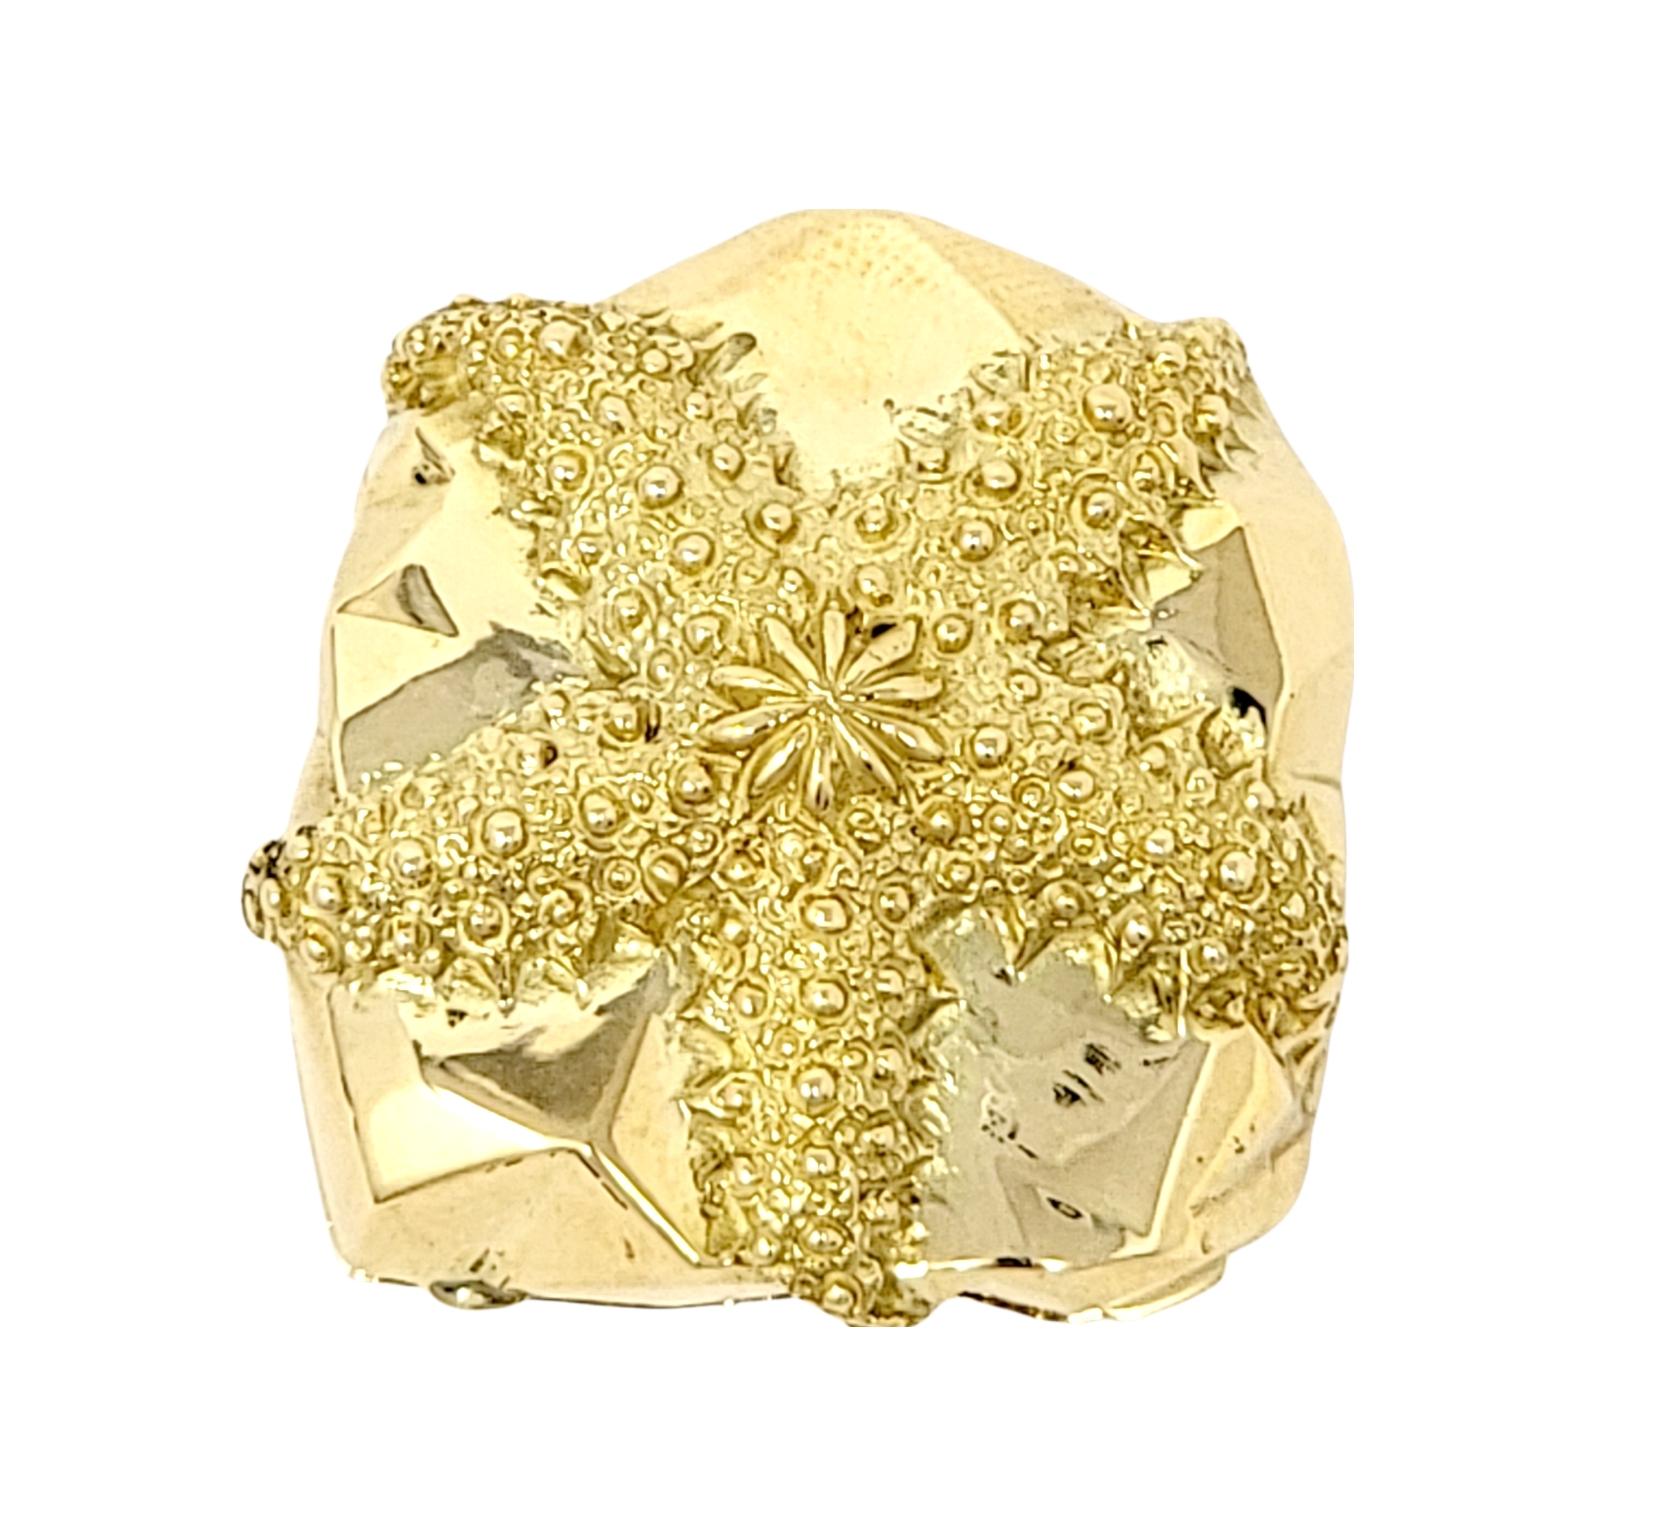 Incredible 18 karat yellow gold vintage pill box. This charming little case was designed by Jean Schlumberger for Tiffany & Co.. It features a beautifully textured starfish motif sitting on top of the polished gold box. The sea creature wraps itself